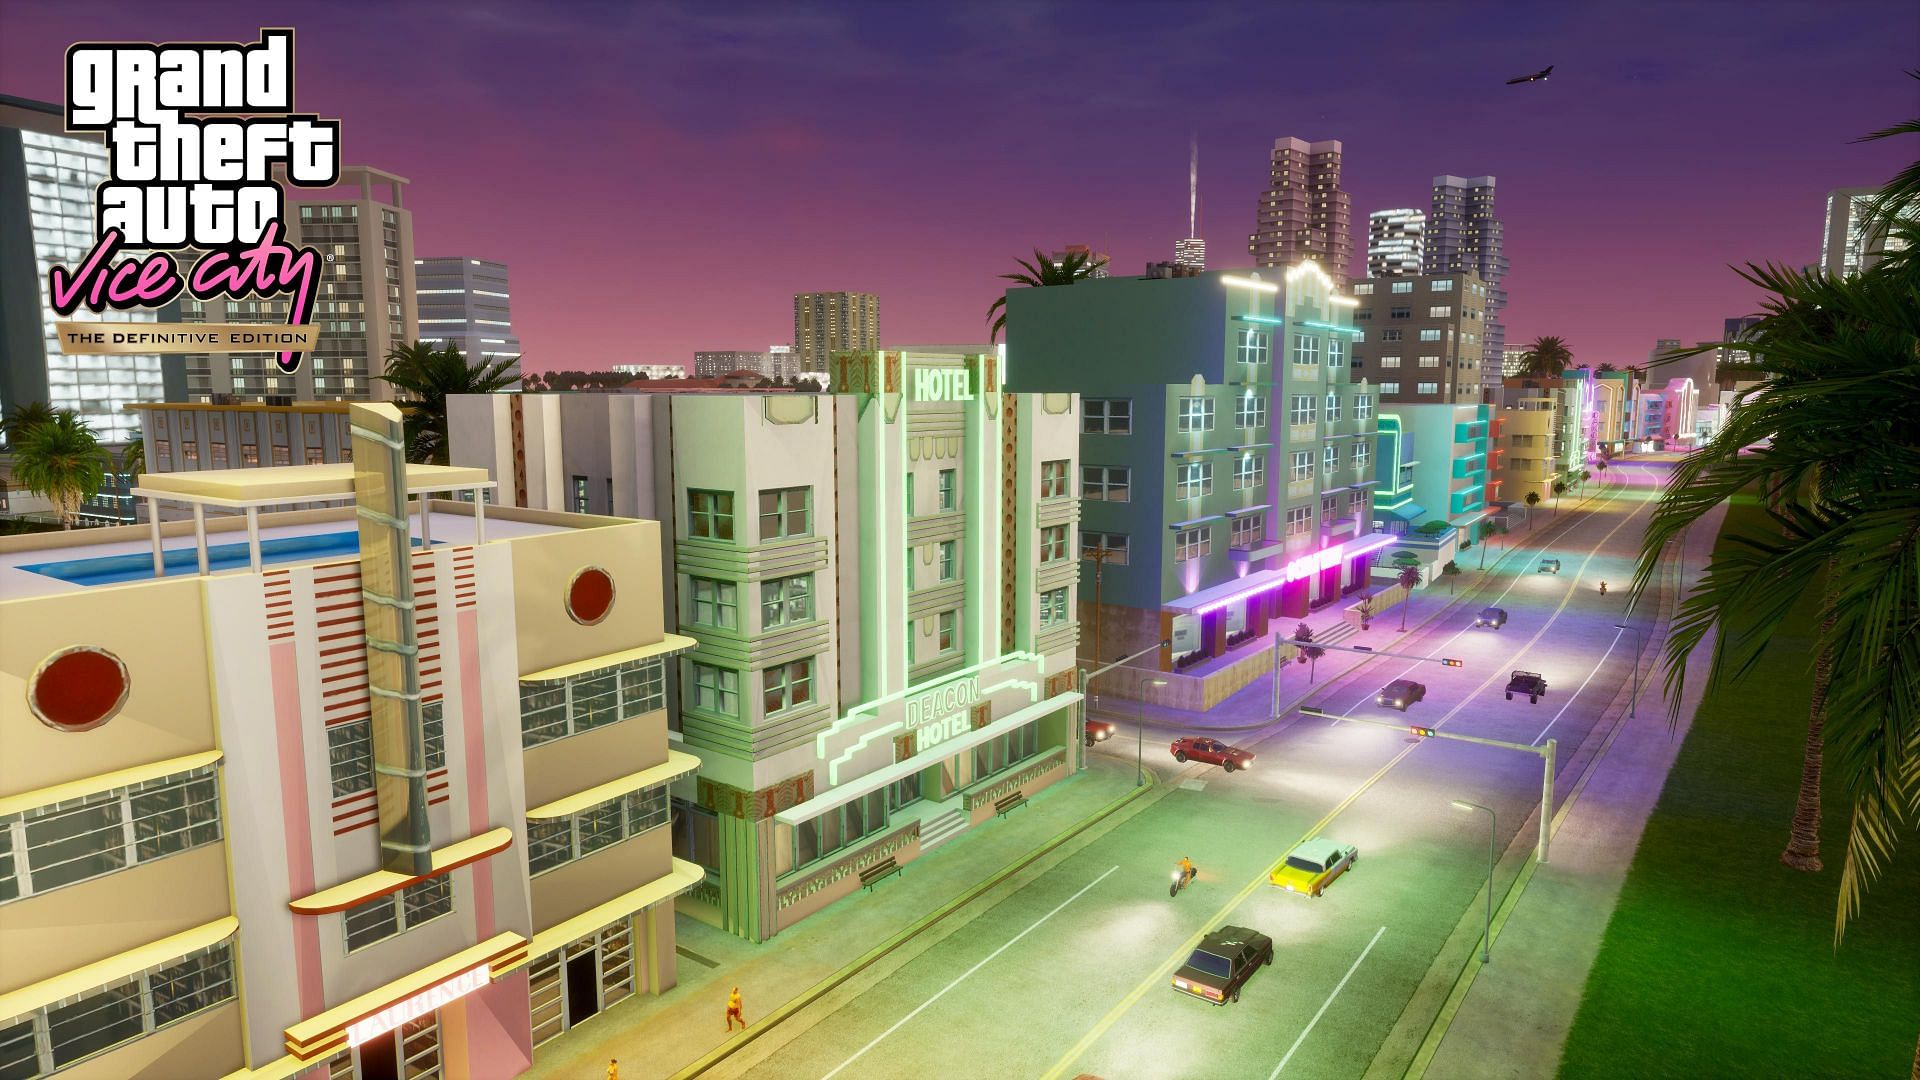 GTA Vice City was released 20 years ago today as fans celebrate its birthday on Twitter (Image via Rockstar Games)